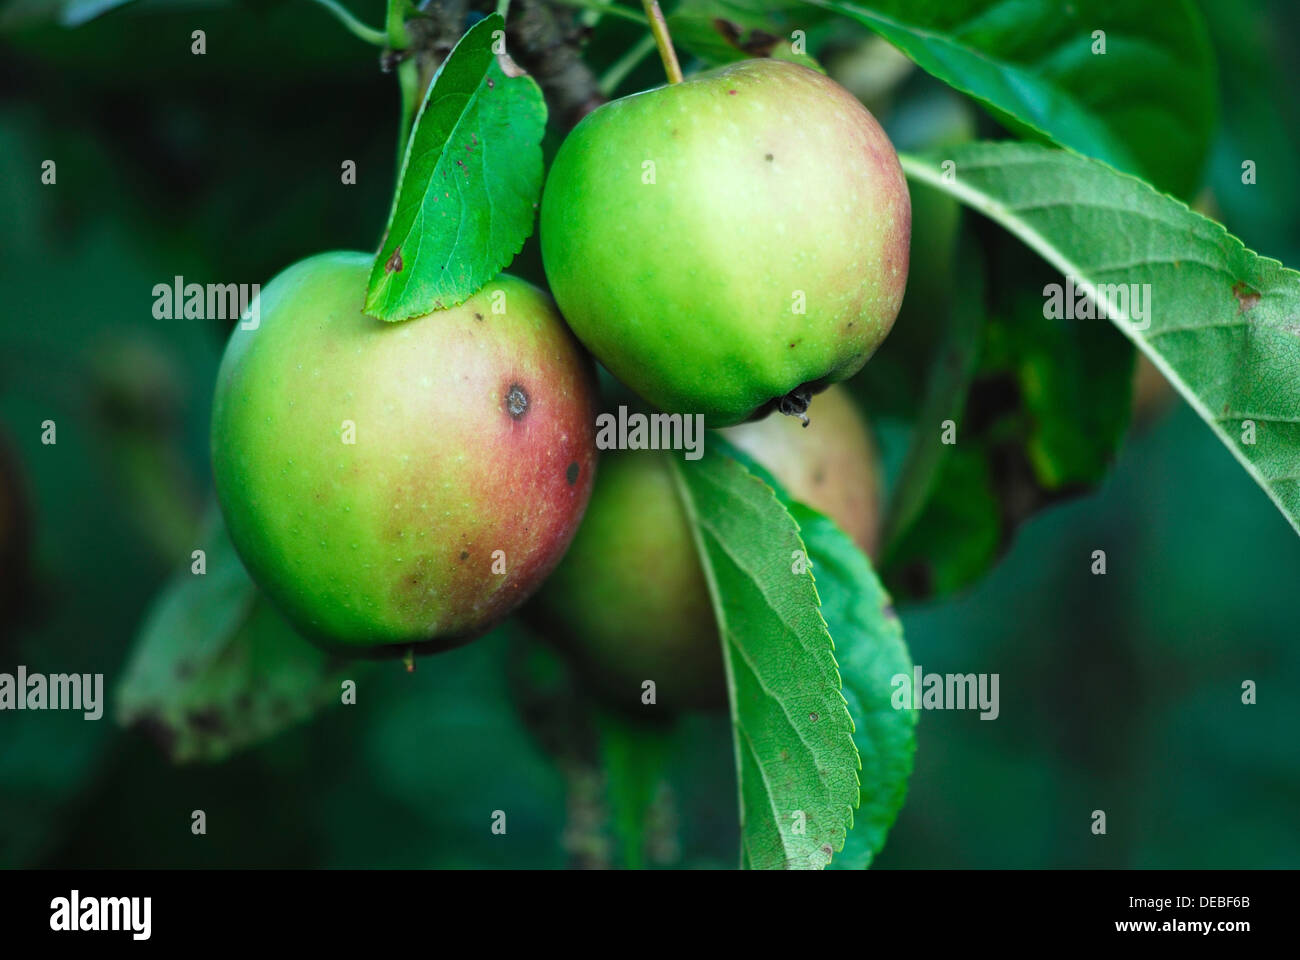 Golden delicious apples growing on the tree UK Stock Photo